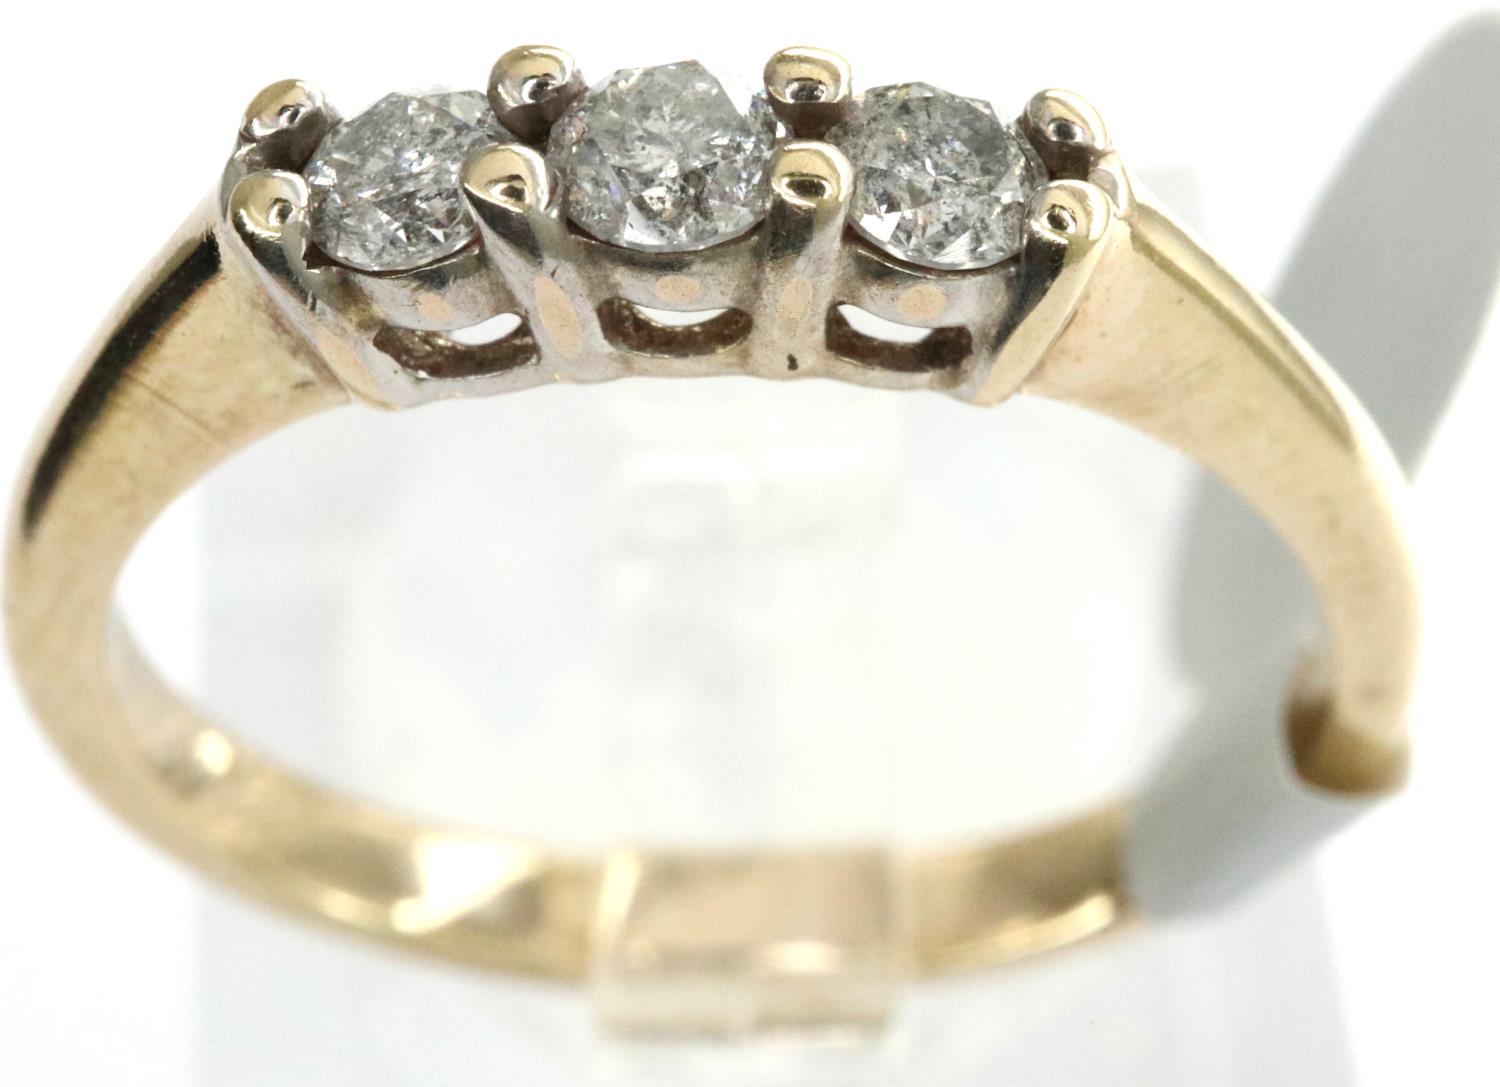 9ct gold three stone diamond ring, fully hallmarked, size L/M, 1.89g. P&P Group 1 (£14+VAT for the